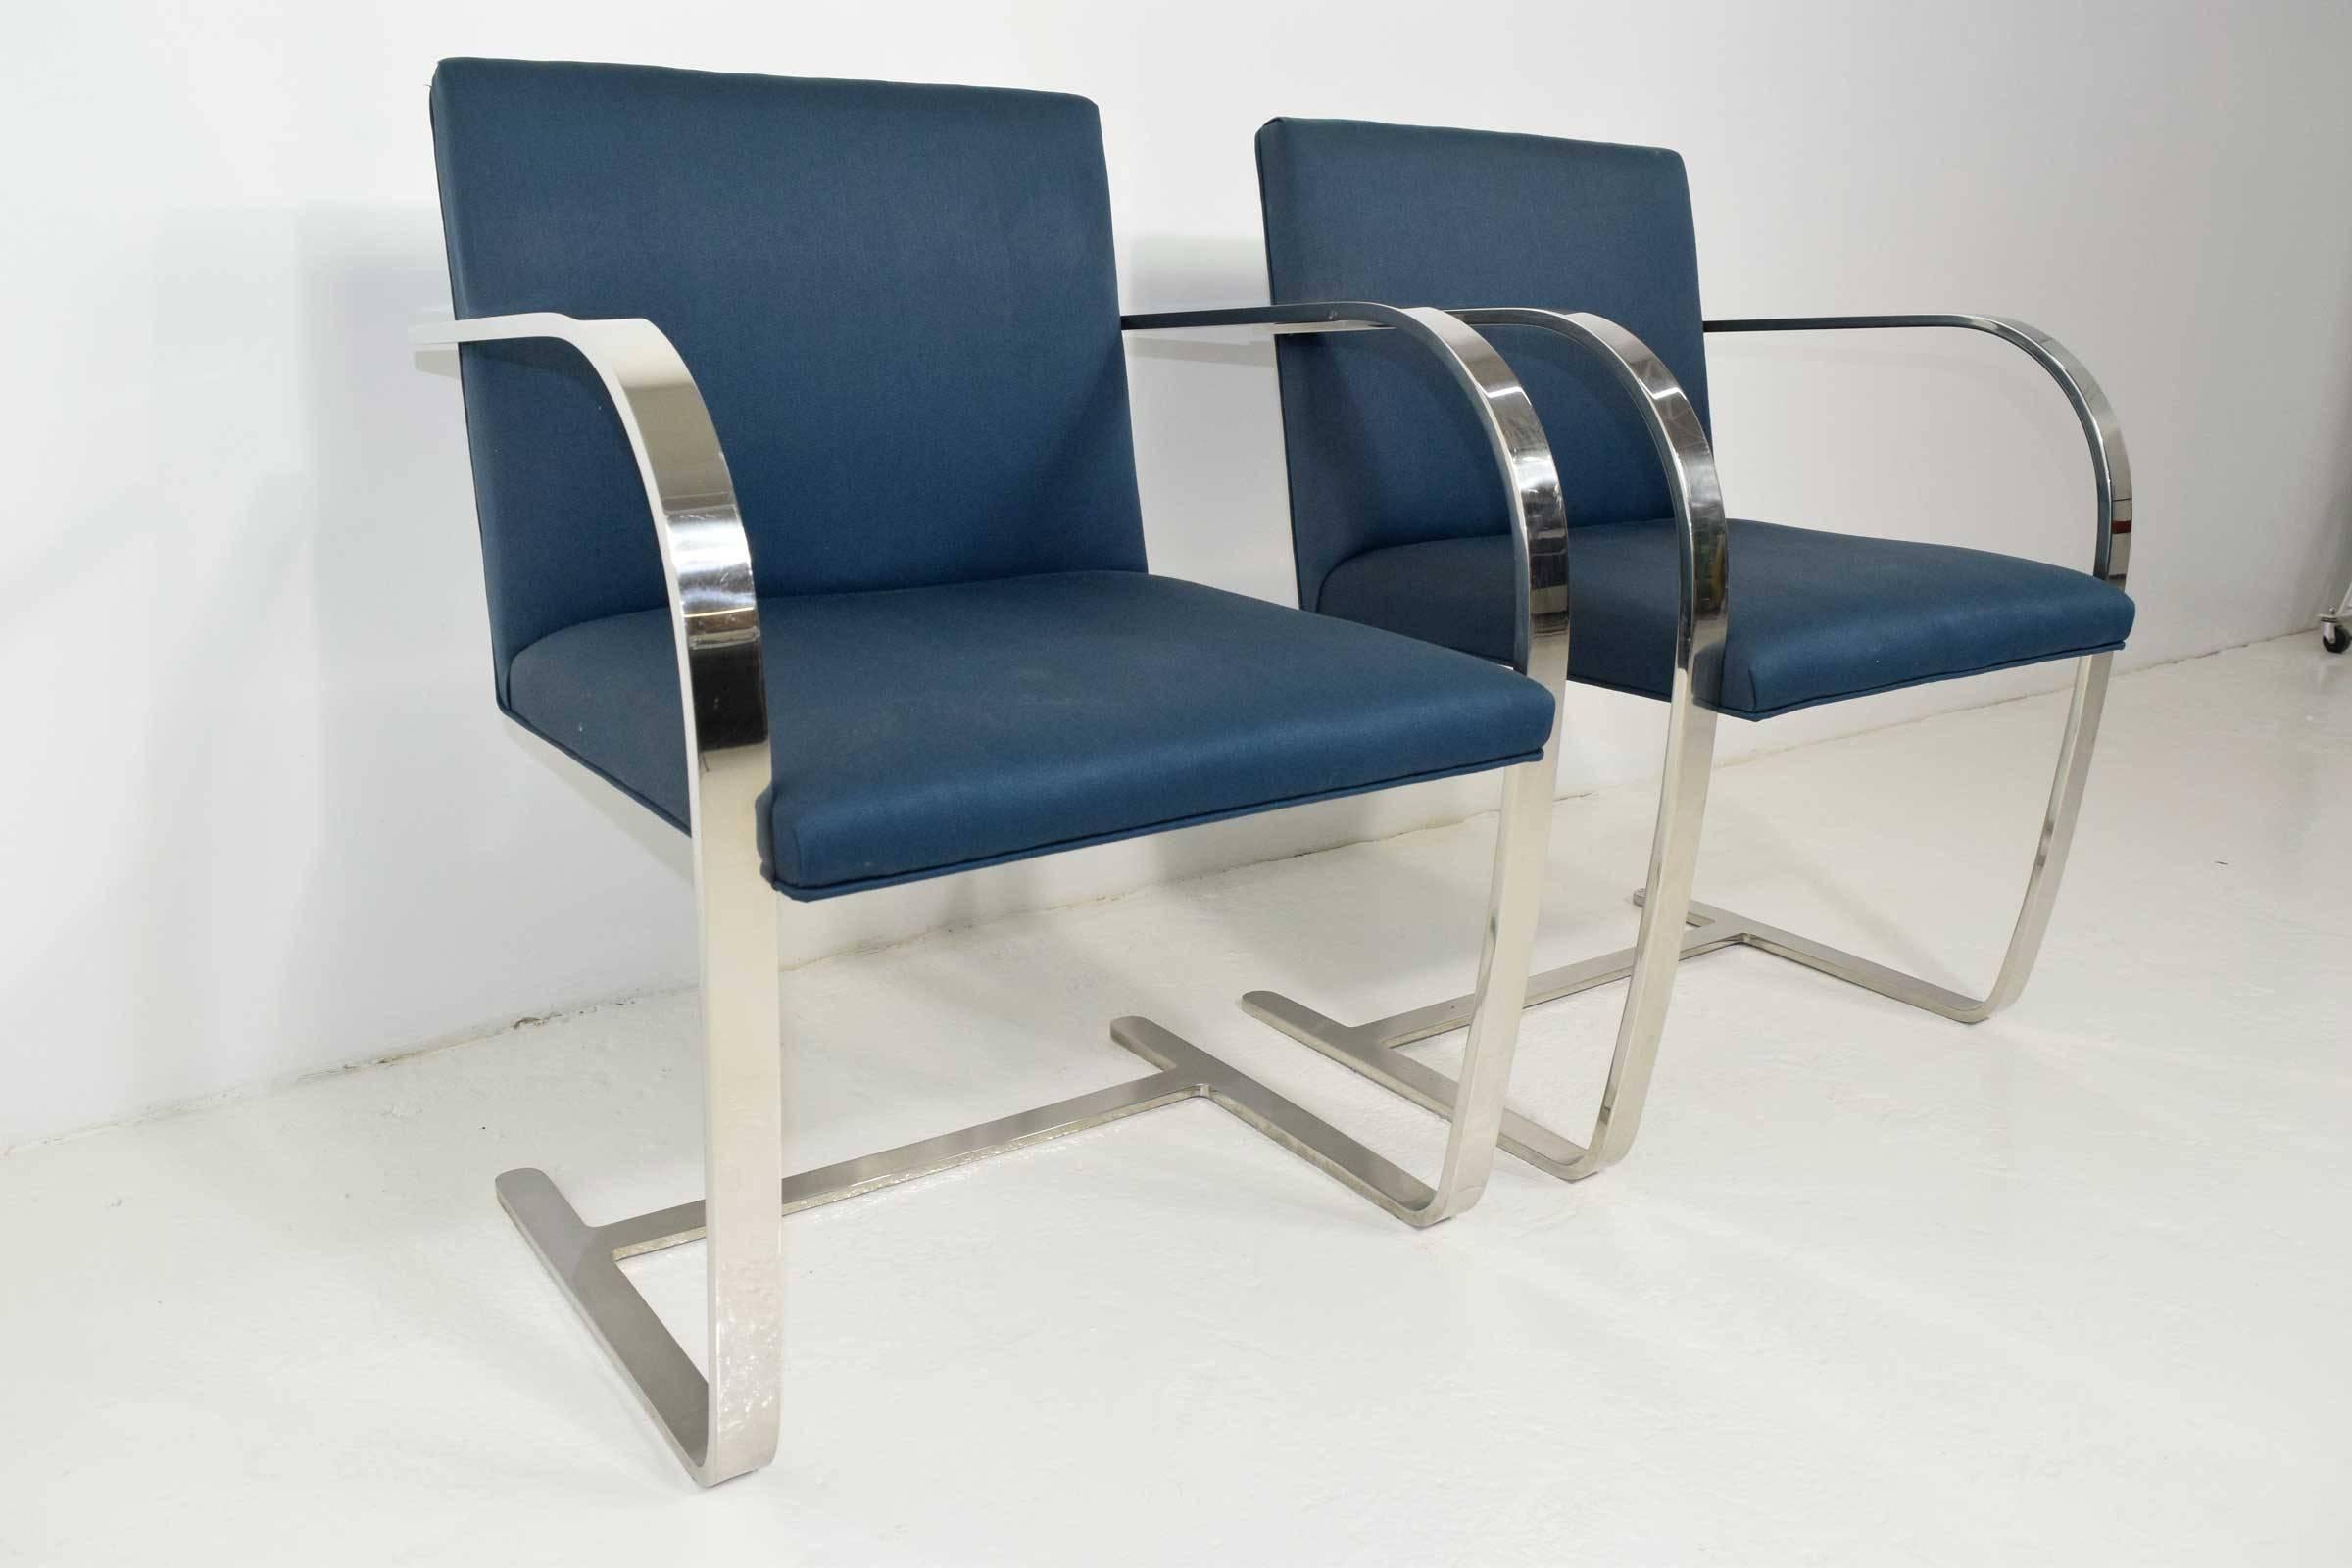 Polished stainless steel, Brno chairs by Gordon International.